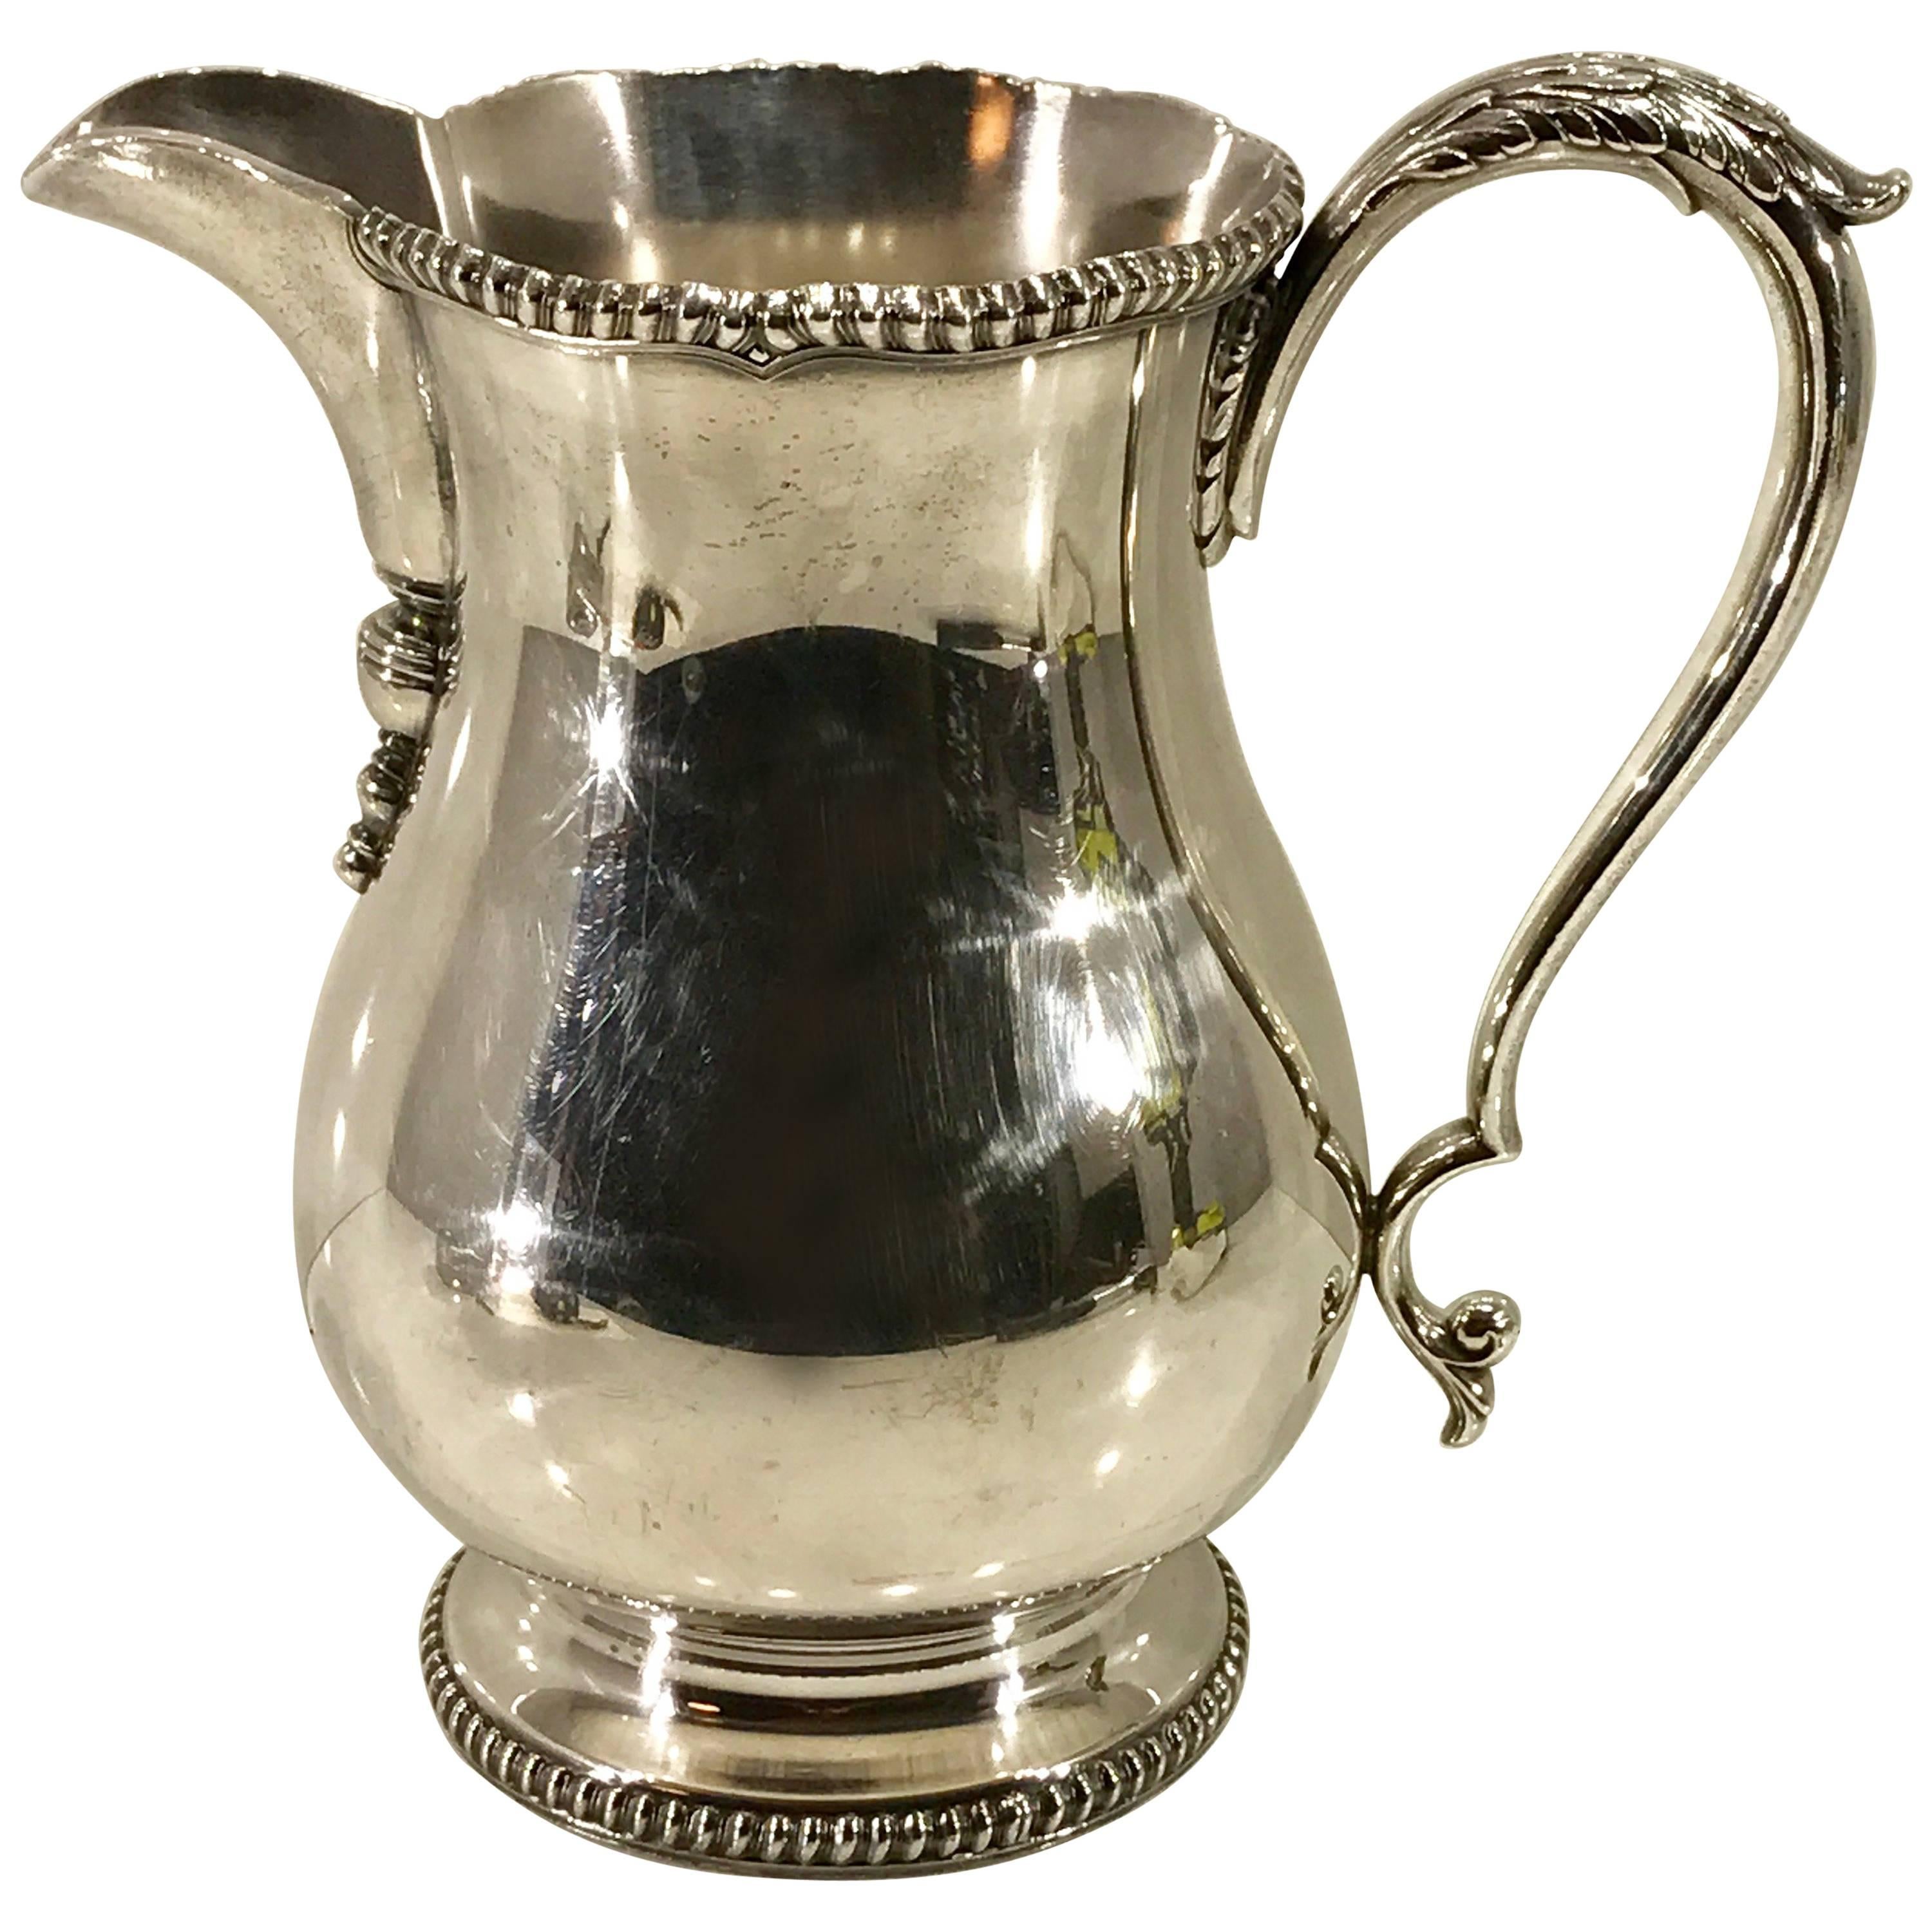 Substantial Georgian Style Silver Plated Water Pitcher